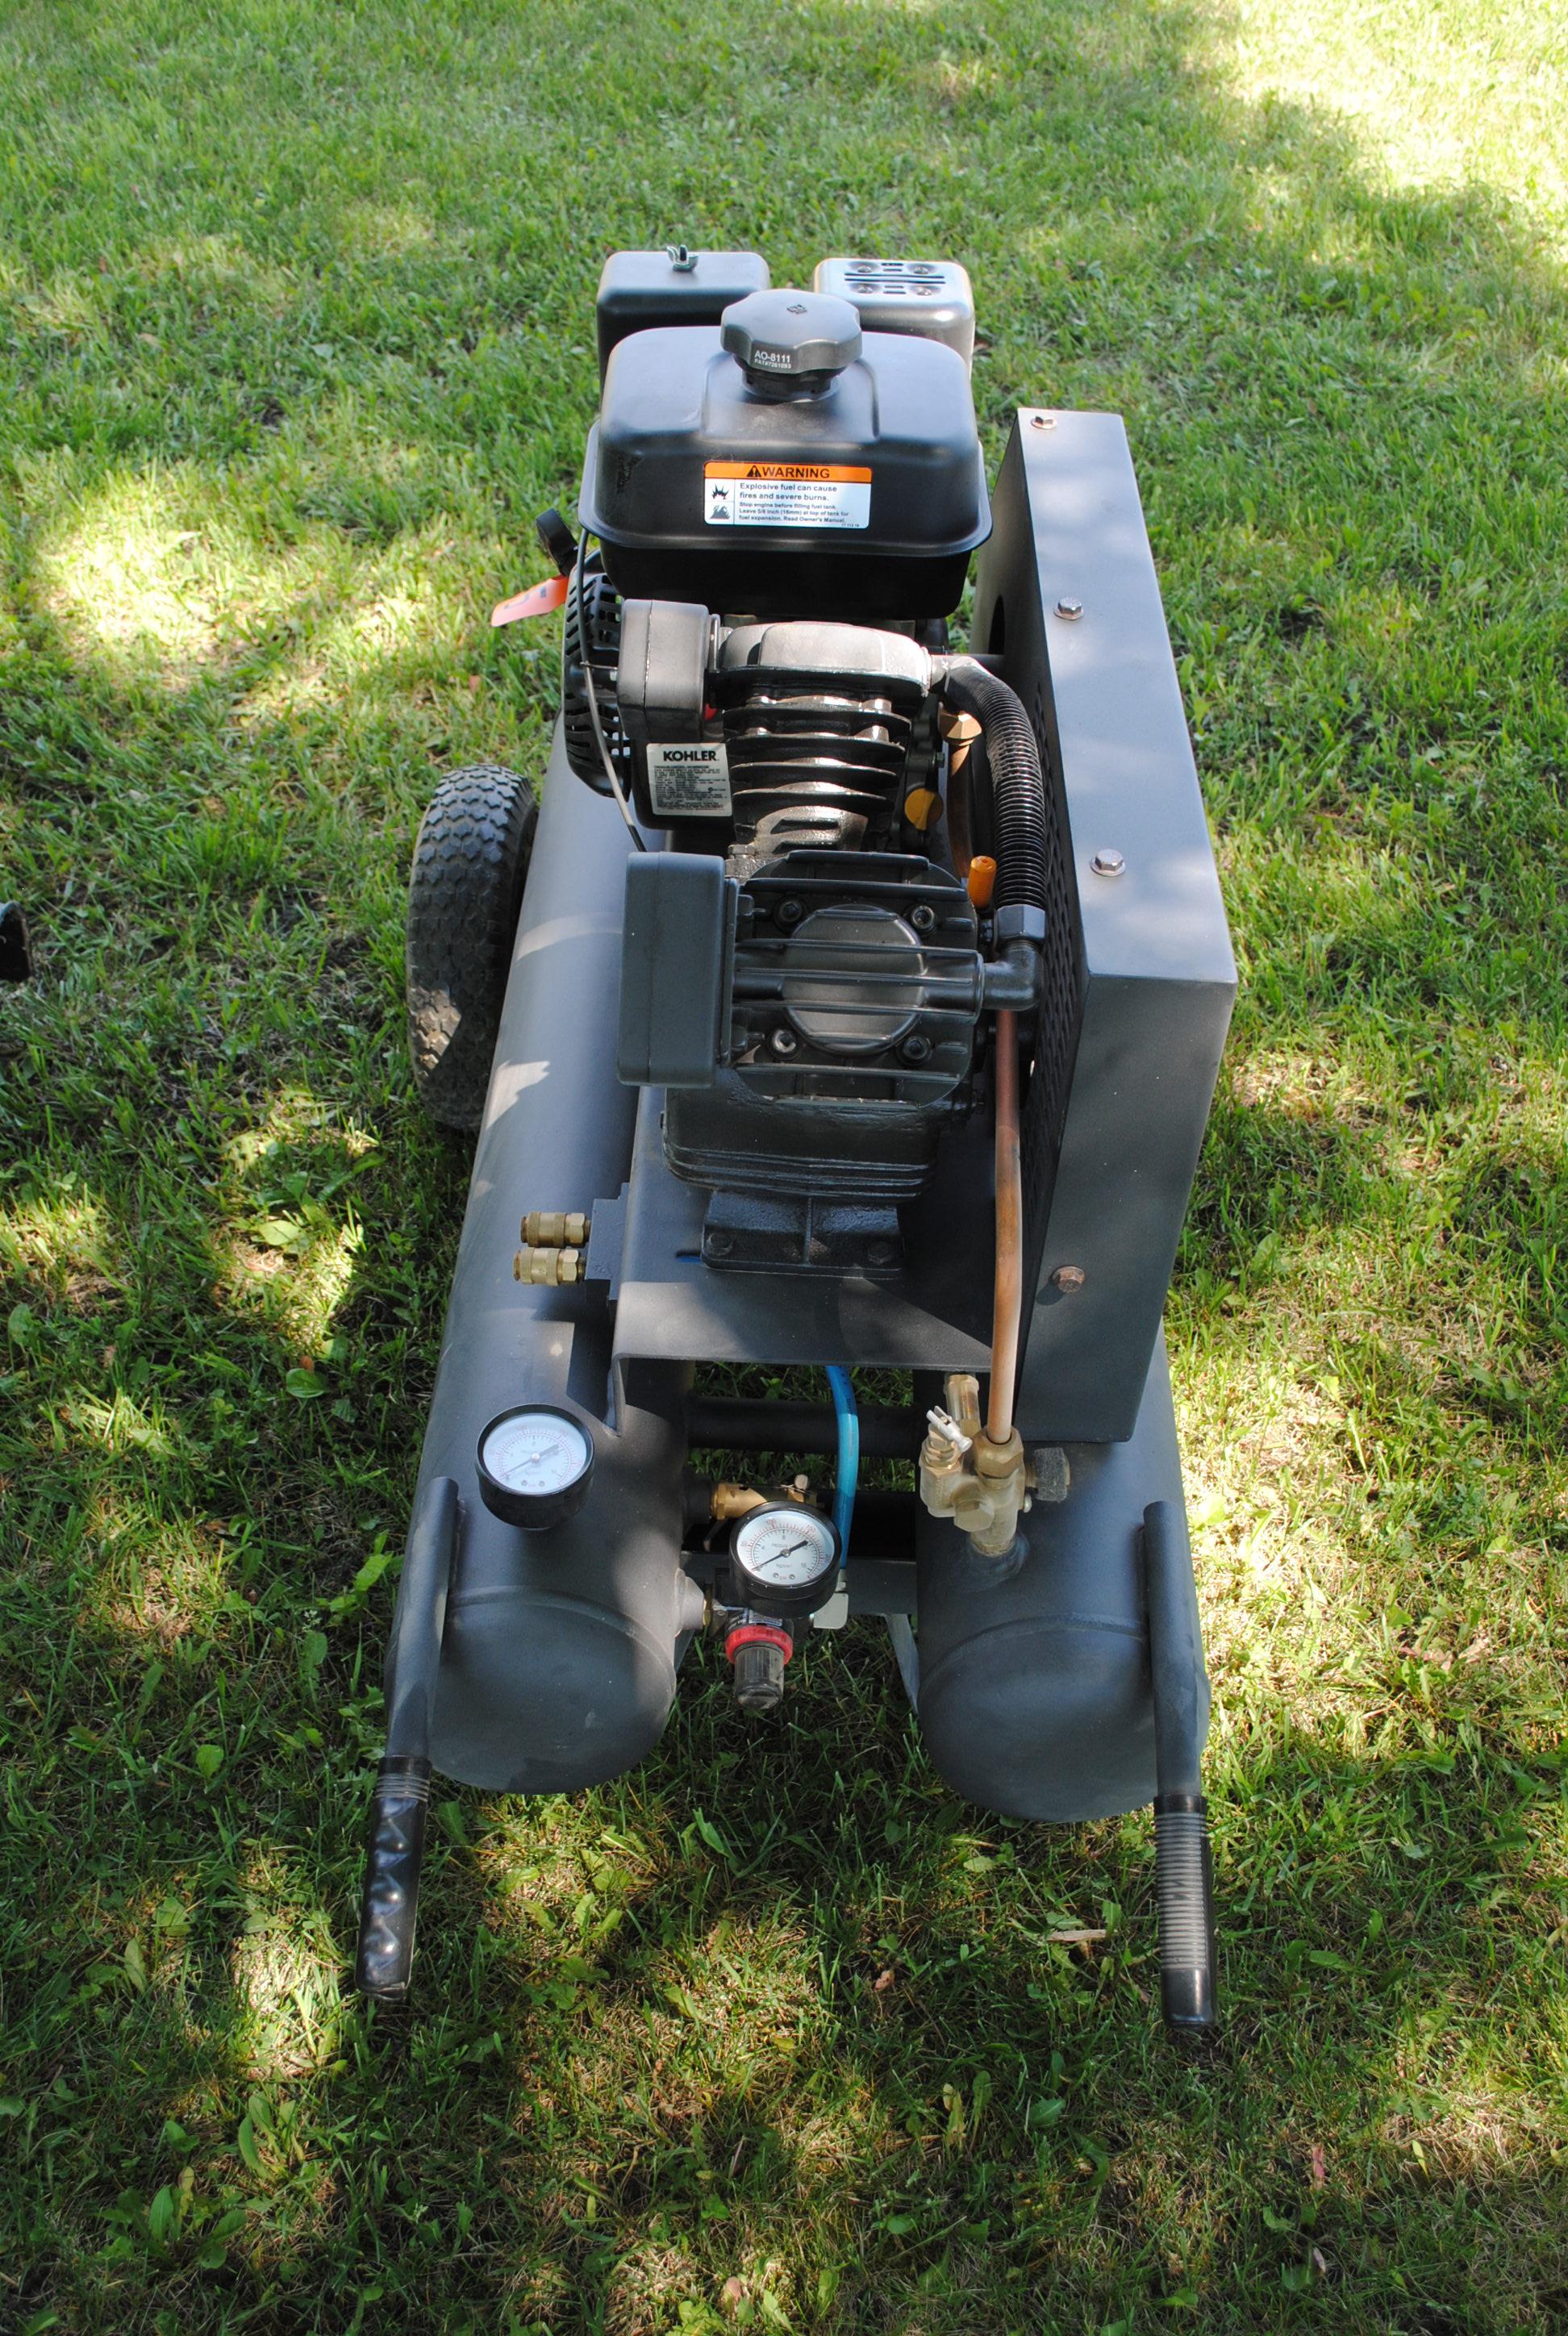 Kohler Courage 6.5HP 196 cc Gas Air Compressor, new, does not have oil or gas in yet